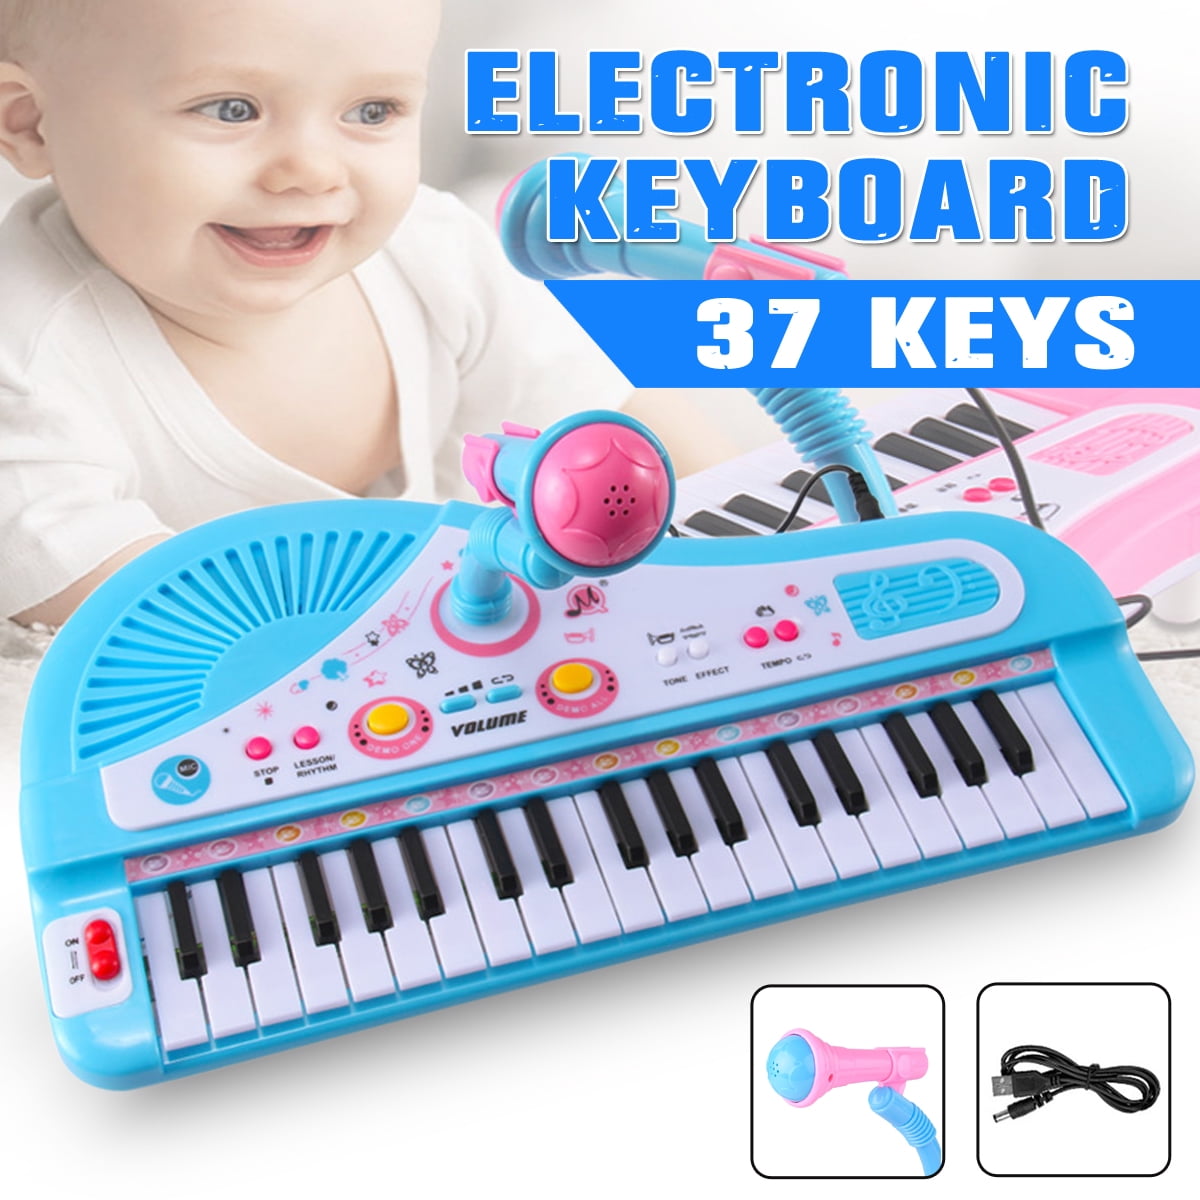 Bl;ue Keyboard Piano for Kids 37 Keys Multifunctional Electronic Kids Keyboard Piano Toy for Begginers Education Instrument